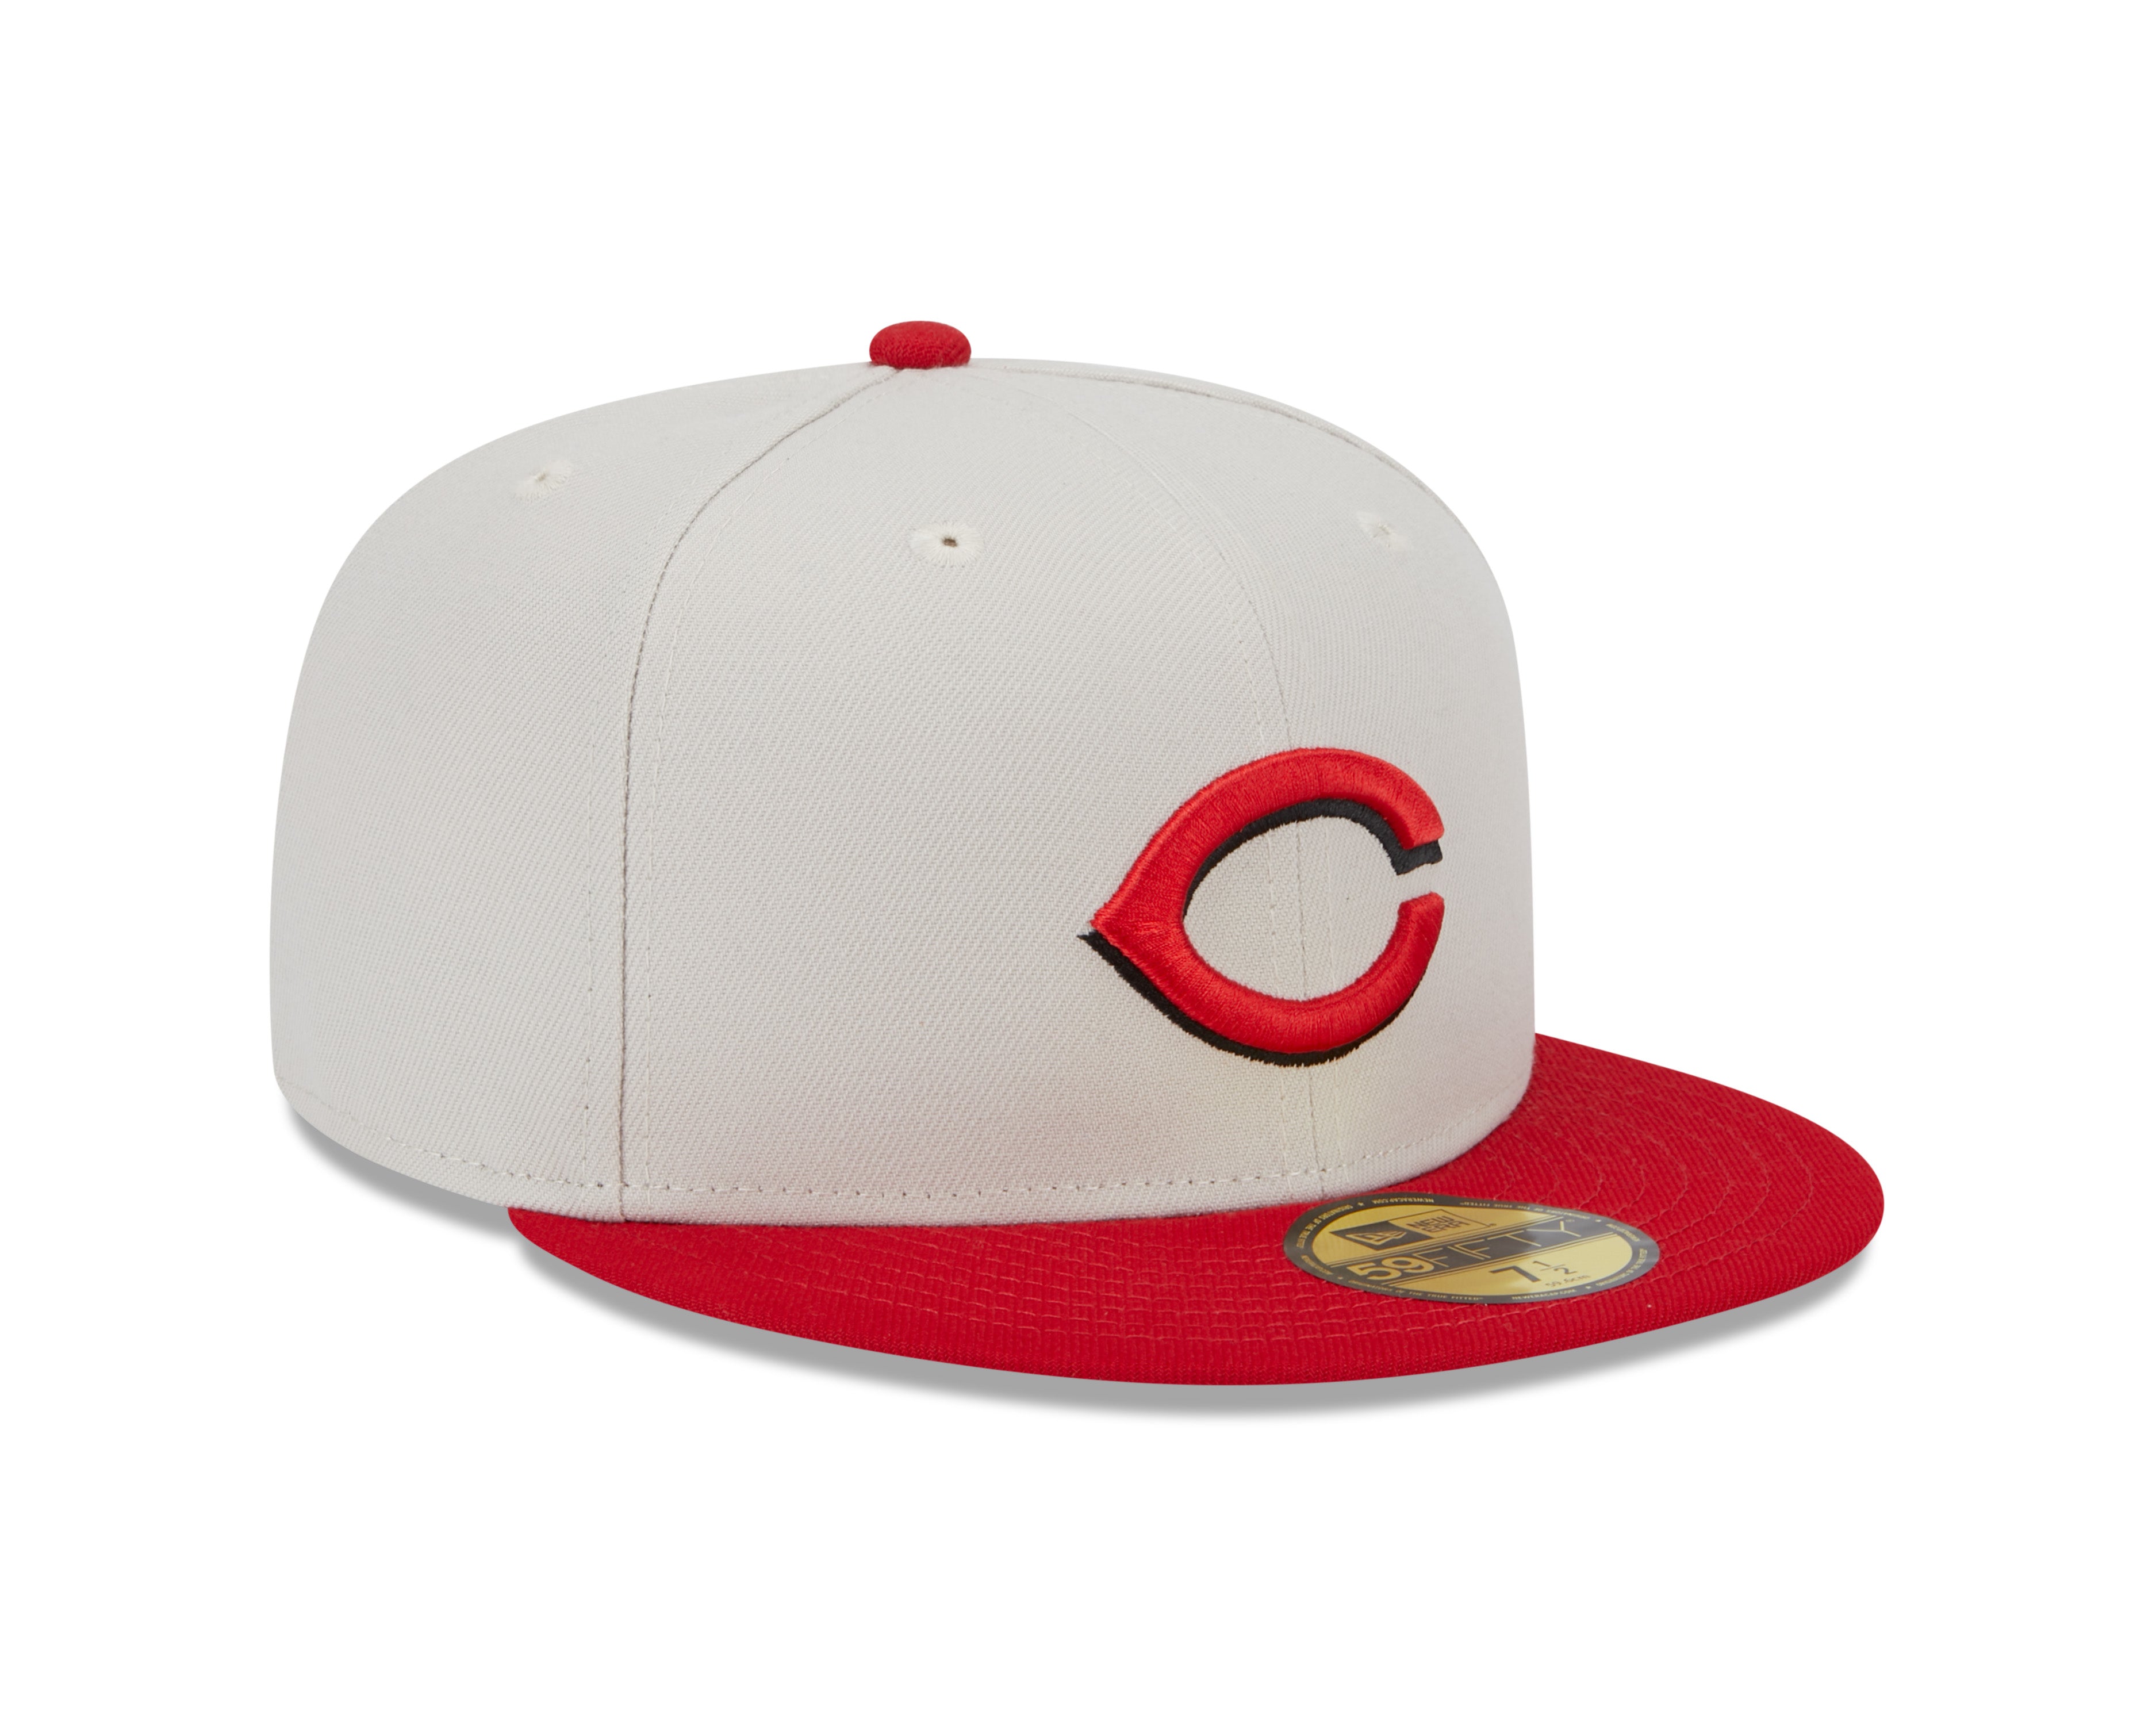 Men's Cincinnati Reds New Era Gray/Red World Class Back Patch 59FIFTY Fitted Hat